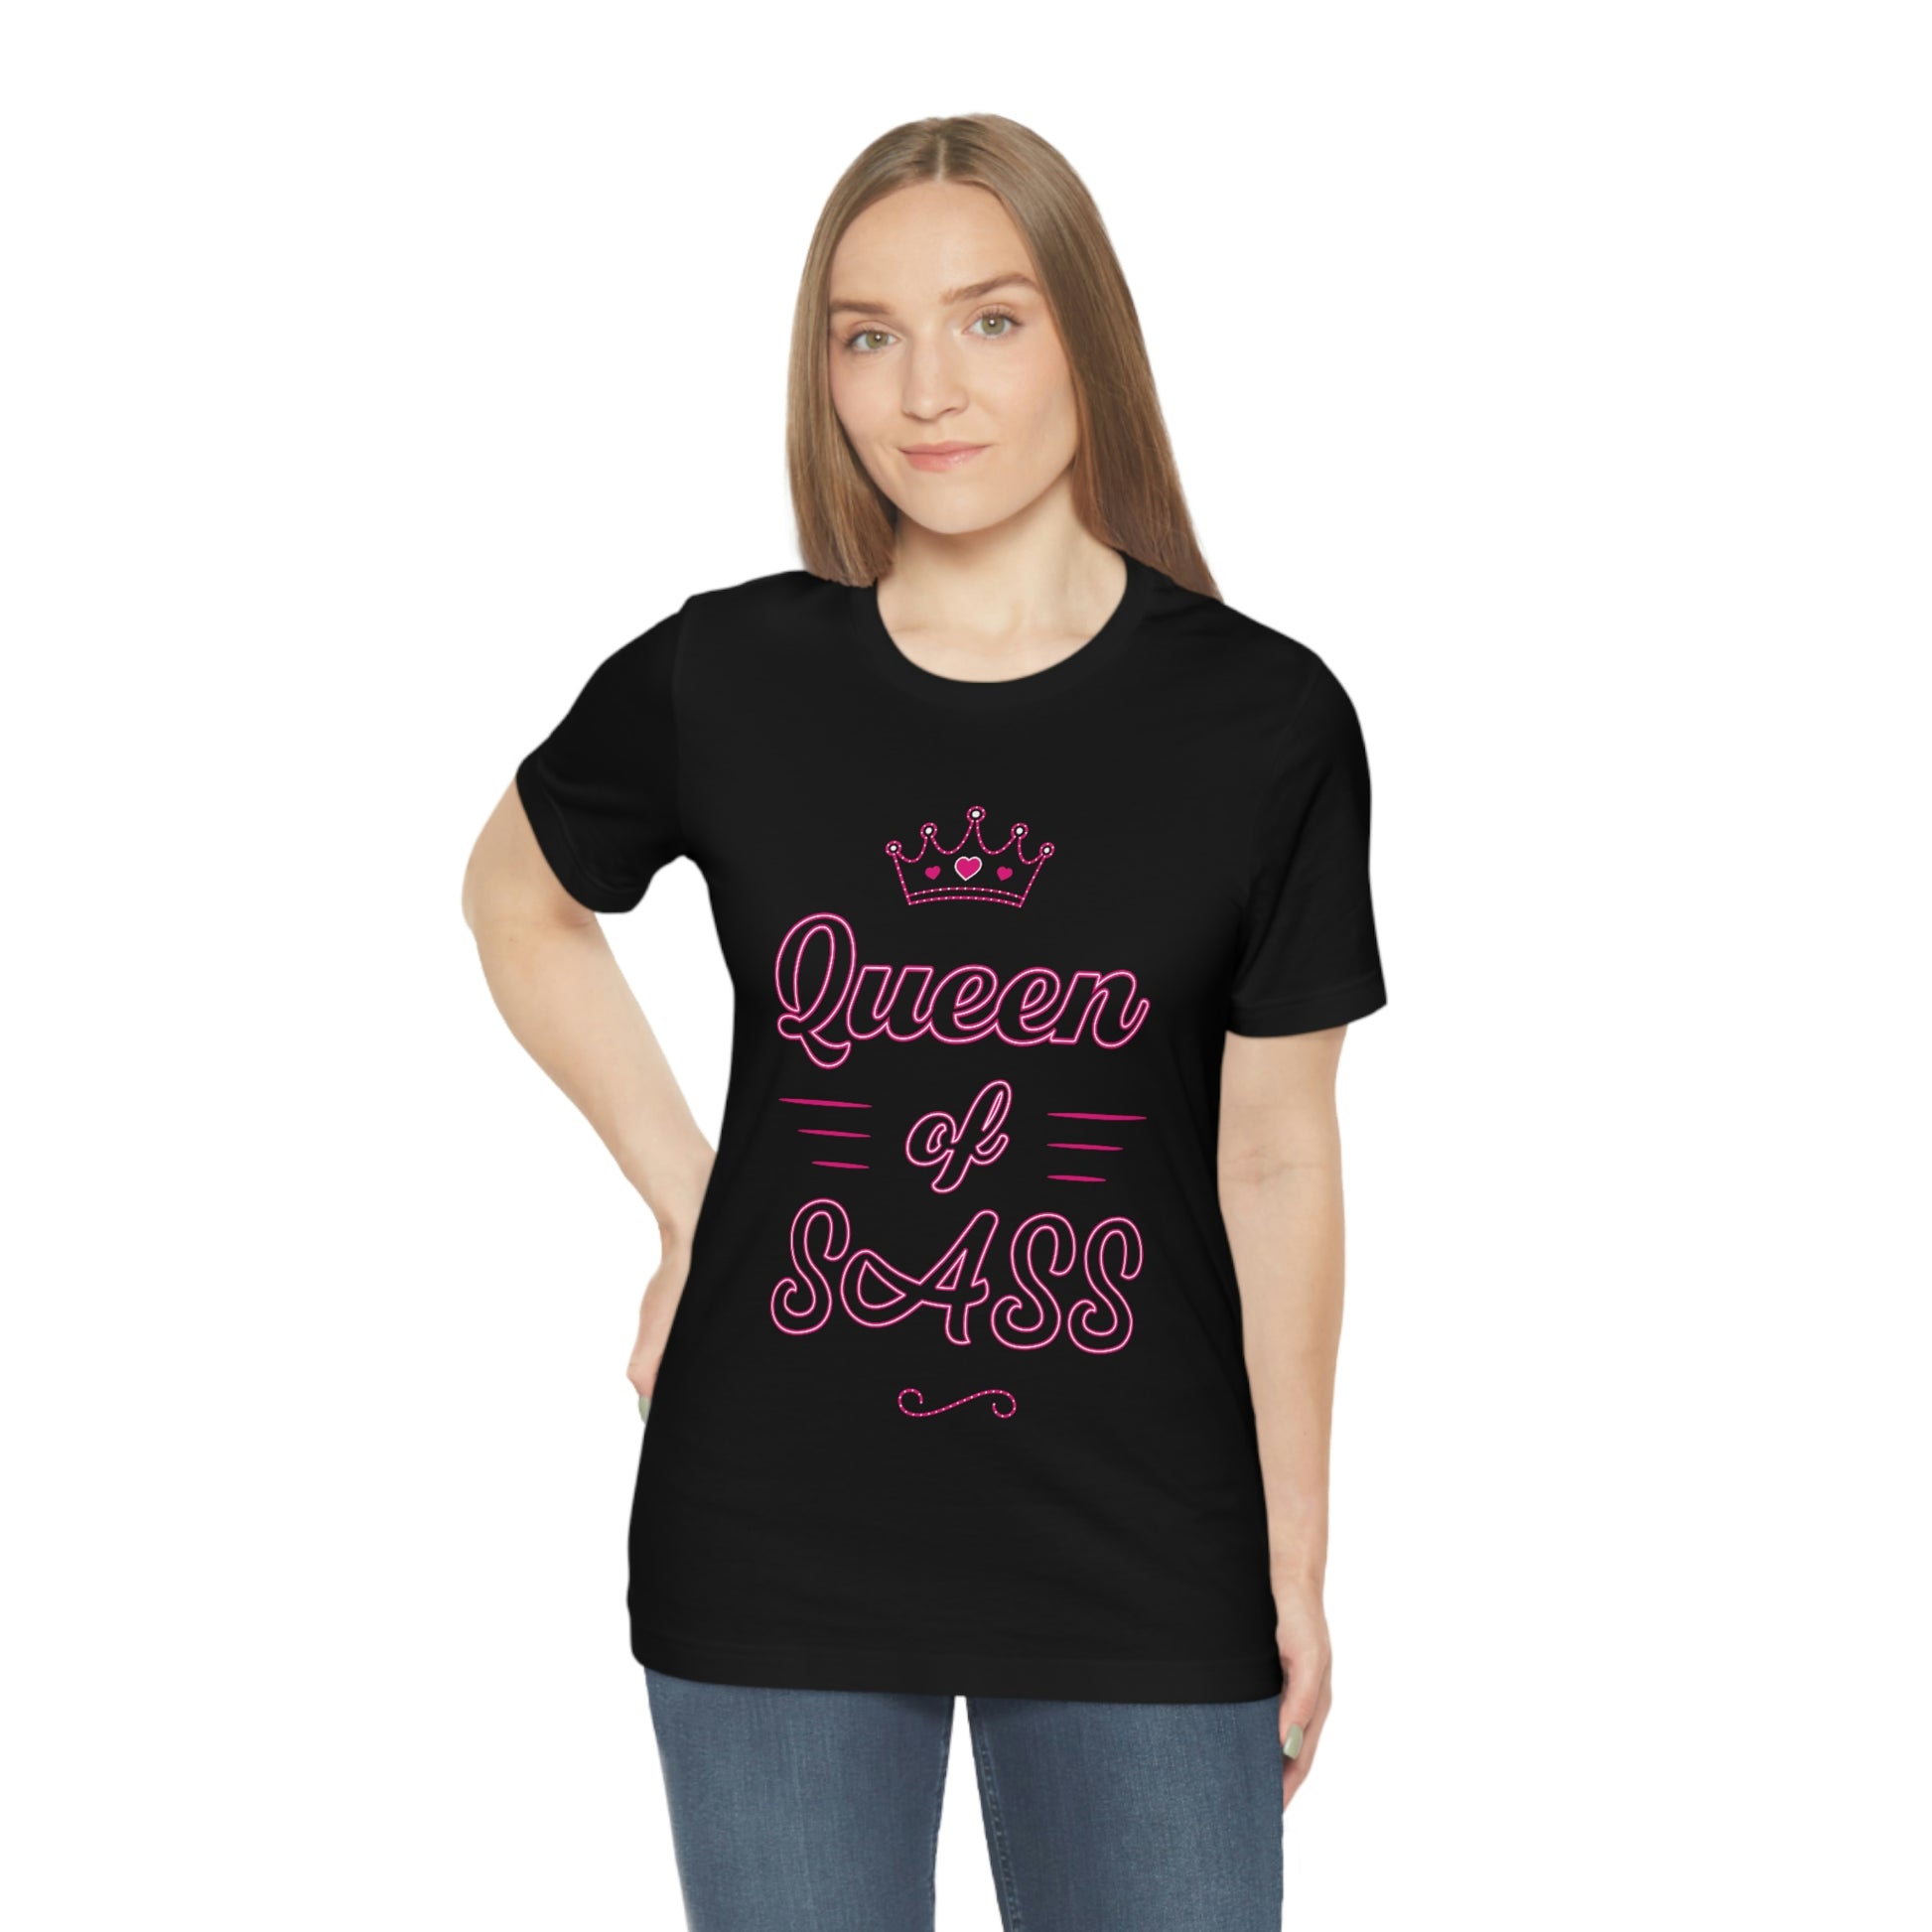 Black T-Shirt with hot pink neon text saying' Queen of Sass'. From the TEQNEON Word Craft collection